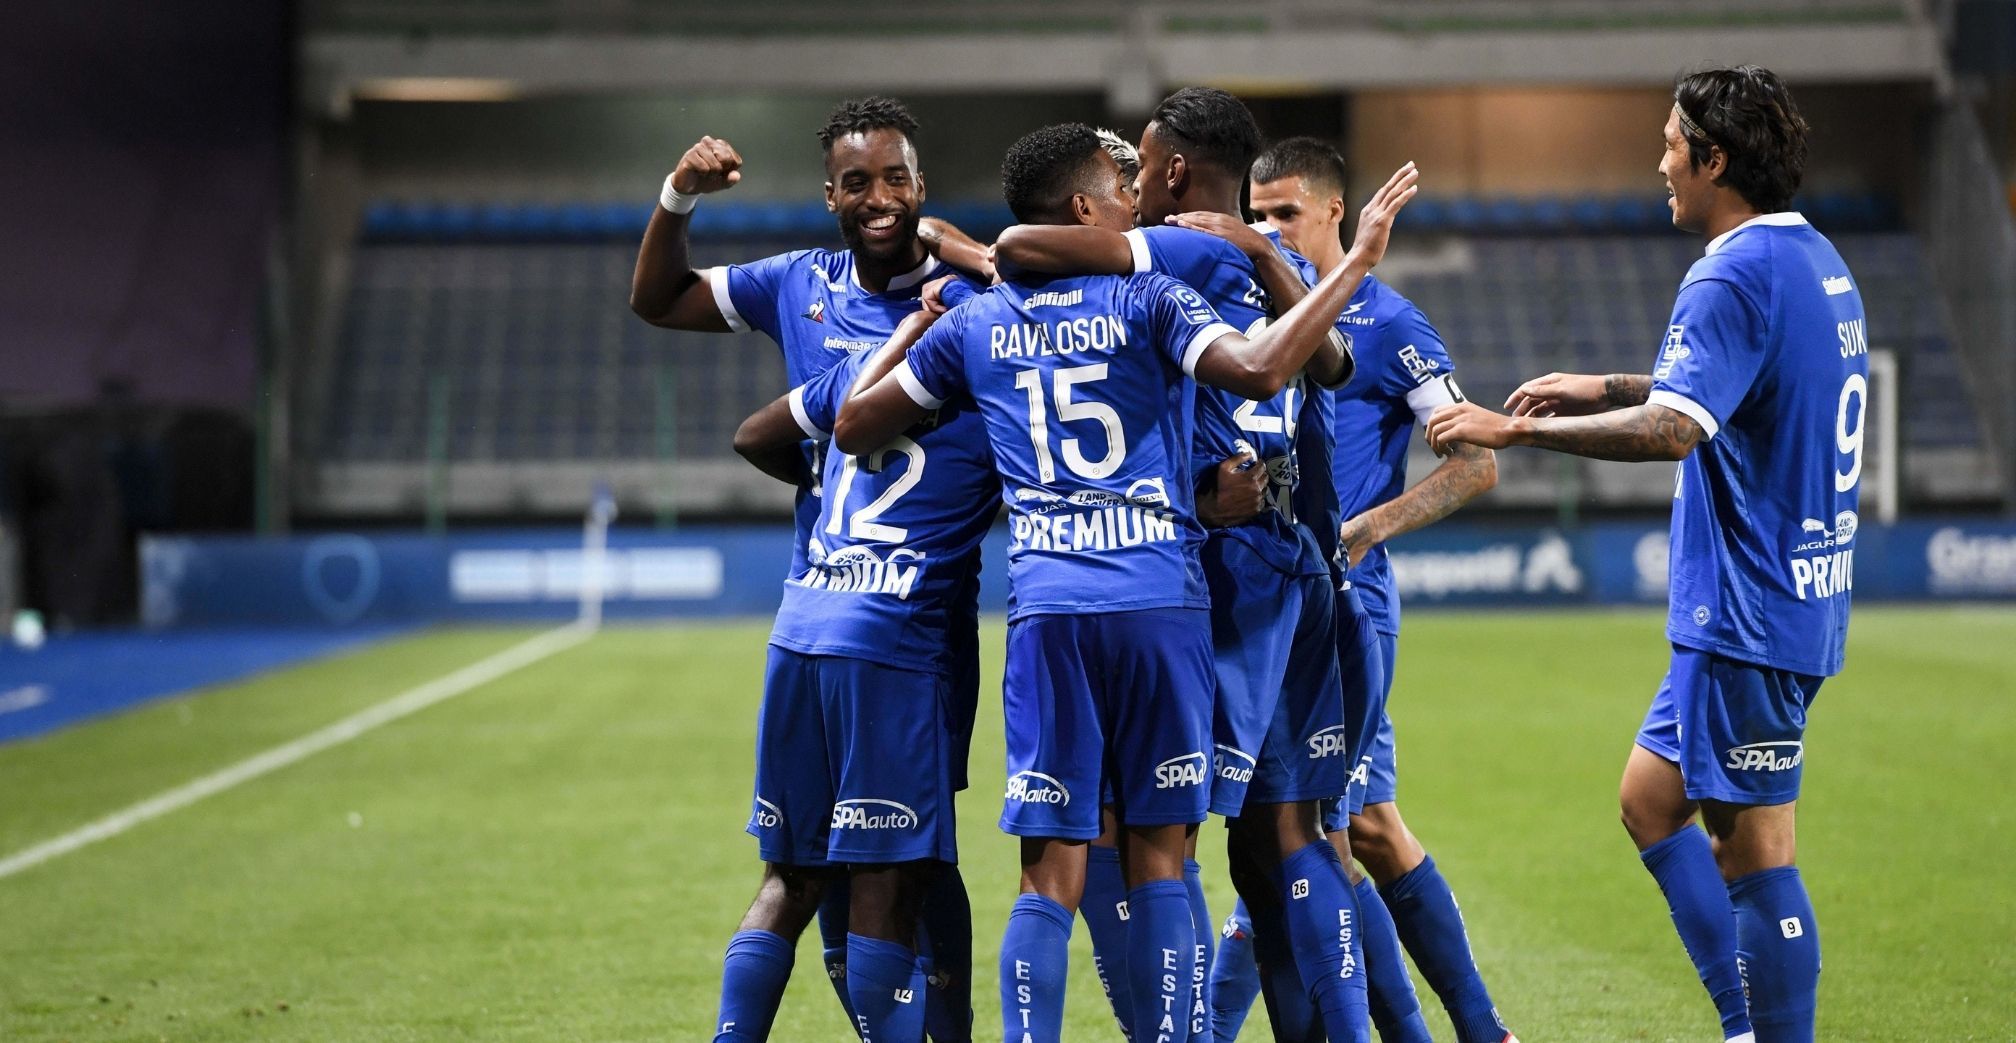 ESTAC Troyes vs Montpellier Prediction, Betting Tips and Odds | 19 FEBRUARY 2023